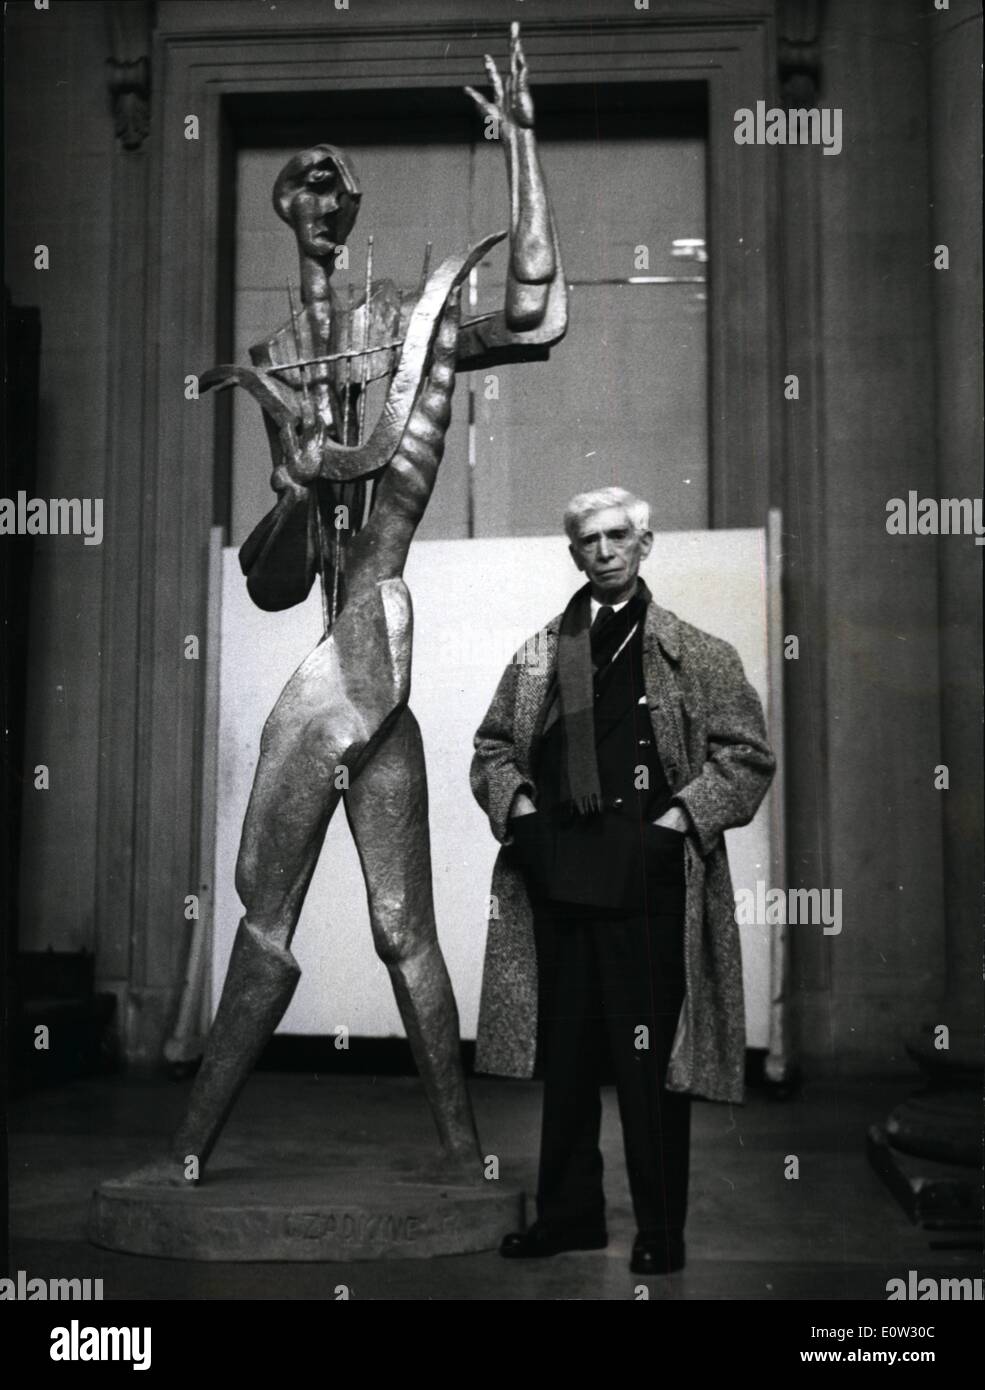 Jan. 01, 1961 - WORKS BY RUSSIAN BORN SCULPTOR - ON SHOW IN LONDON. Eighty-three exhibits by Russian born Ossip Zadkine - said to be one of the greatest modern sculptors of the day - are being shown at the Tate Gallery in London. This is the first major exhibition of his works here - but they have been seen in New York and Paris etc.. The exhibition shows his progress as a sculptor from 1954 to the present day. Keystone Photo Shows:  Ossip Zadkine the sculptor with ''Orpheus'' - a sculpture in bronze - at the Tate Gallery. This is an example of his later work - and is more than six feet tall. Stock Photo